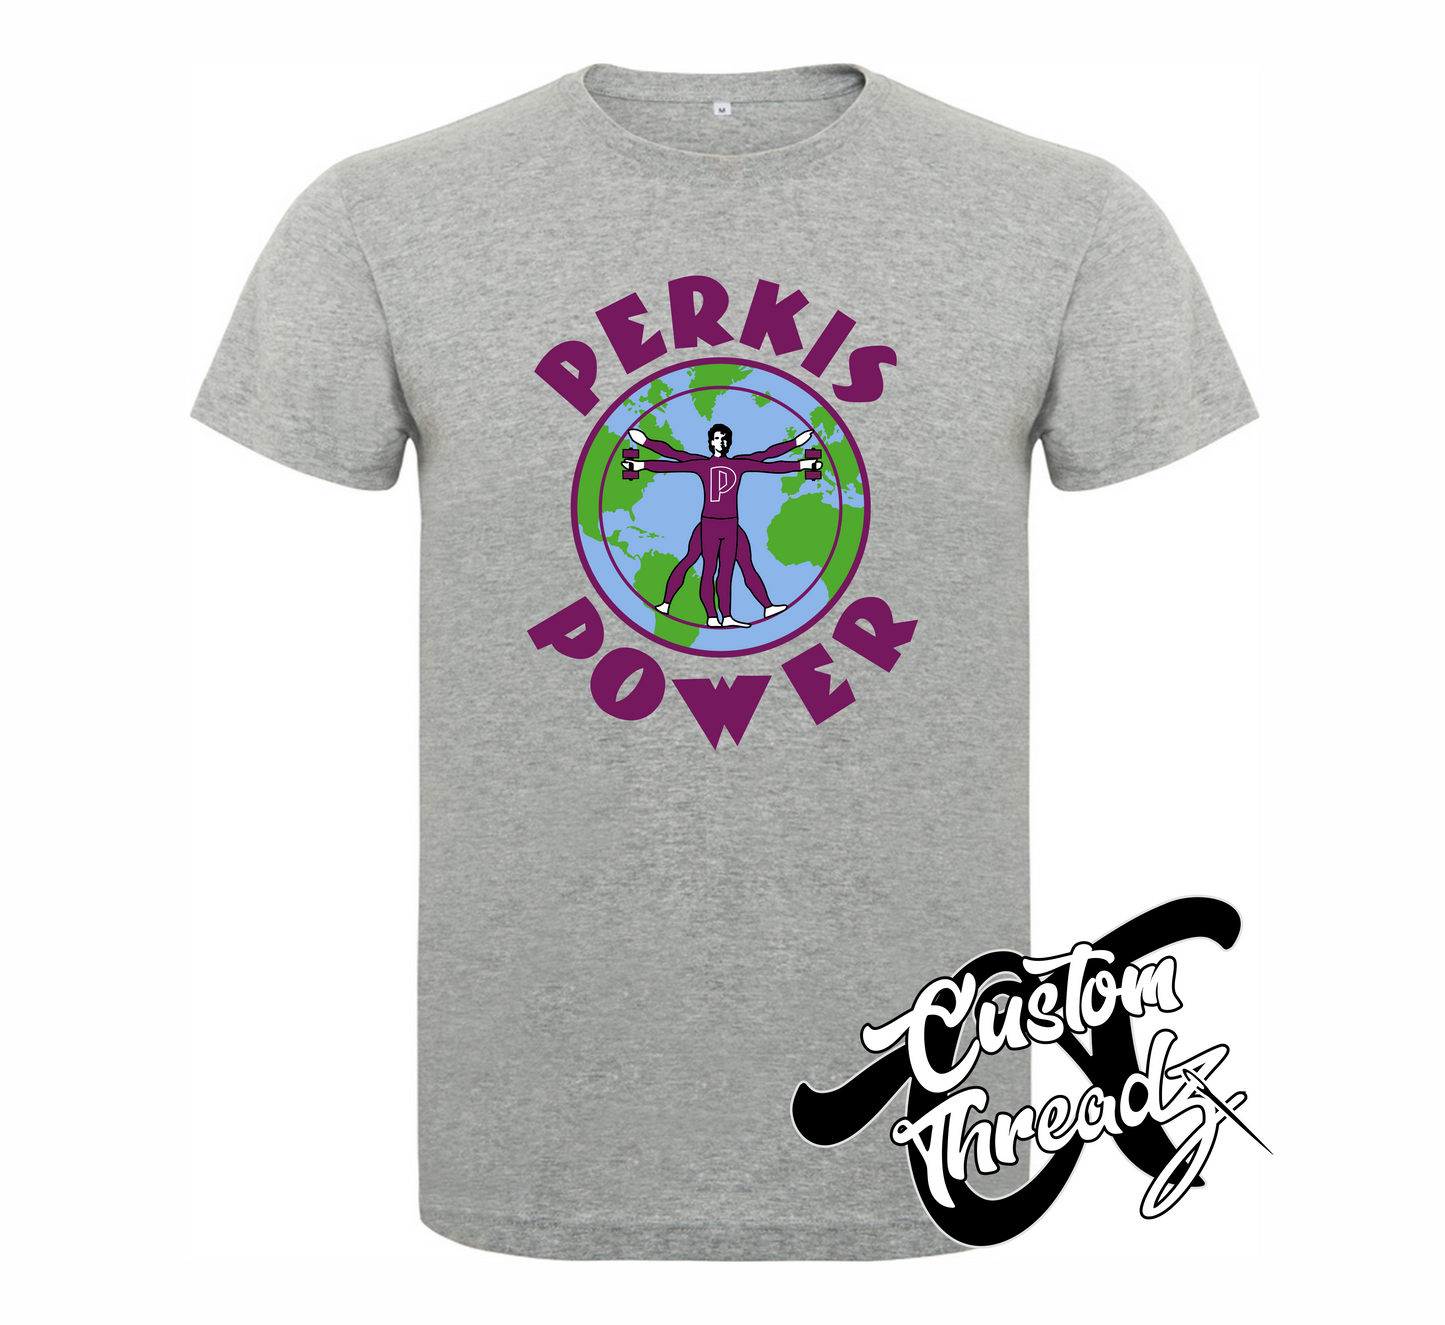 athletic heather grey tee with perkis power heavyweights DTG printed design